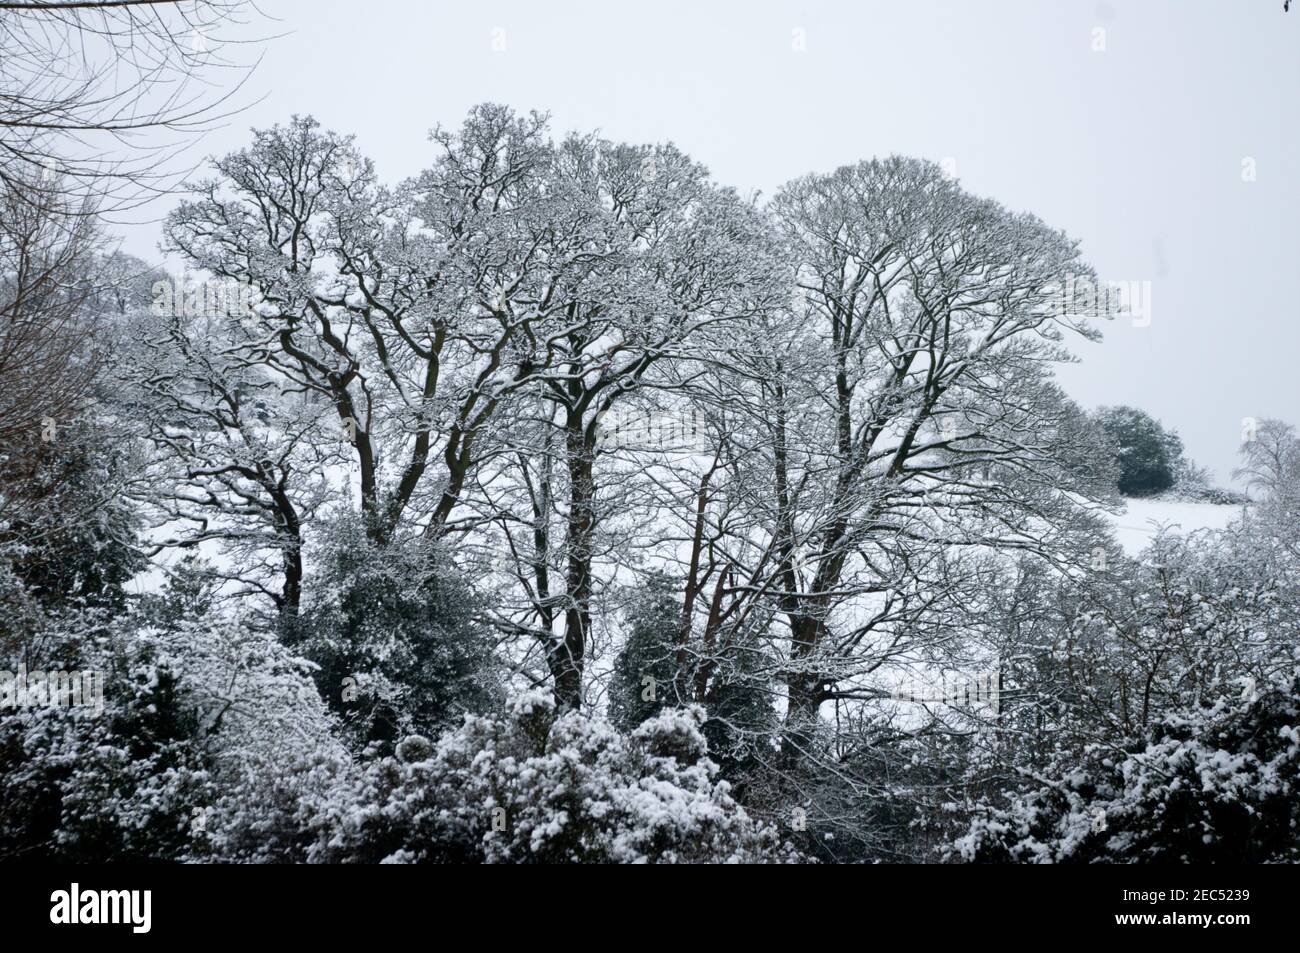 Mature trees in winter snow in typical Worcestershire countryside near Bromsgrove. Stock Photo